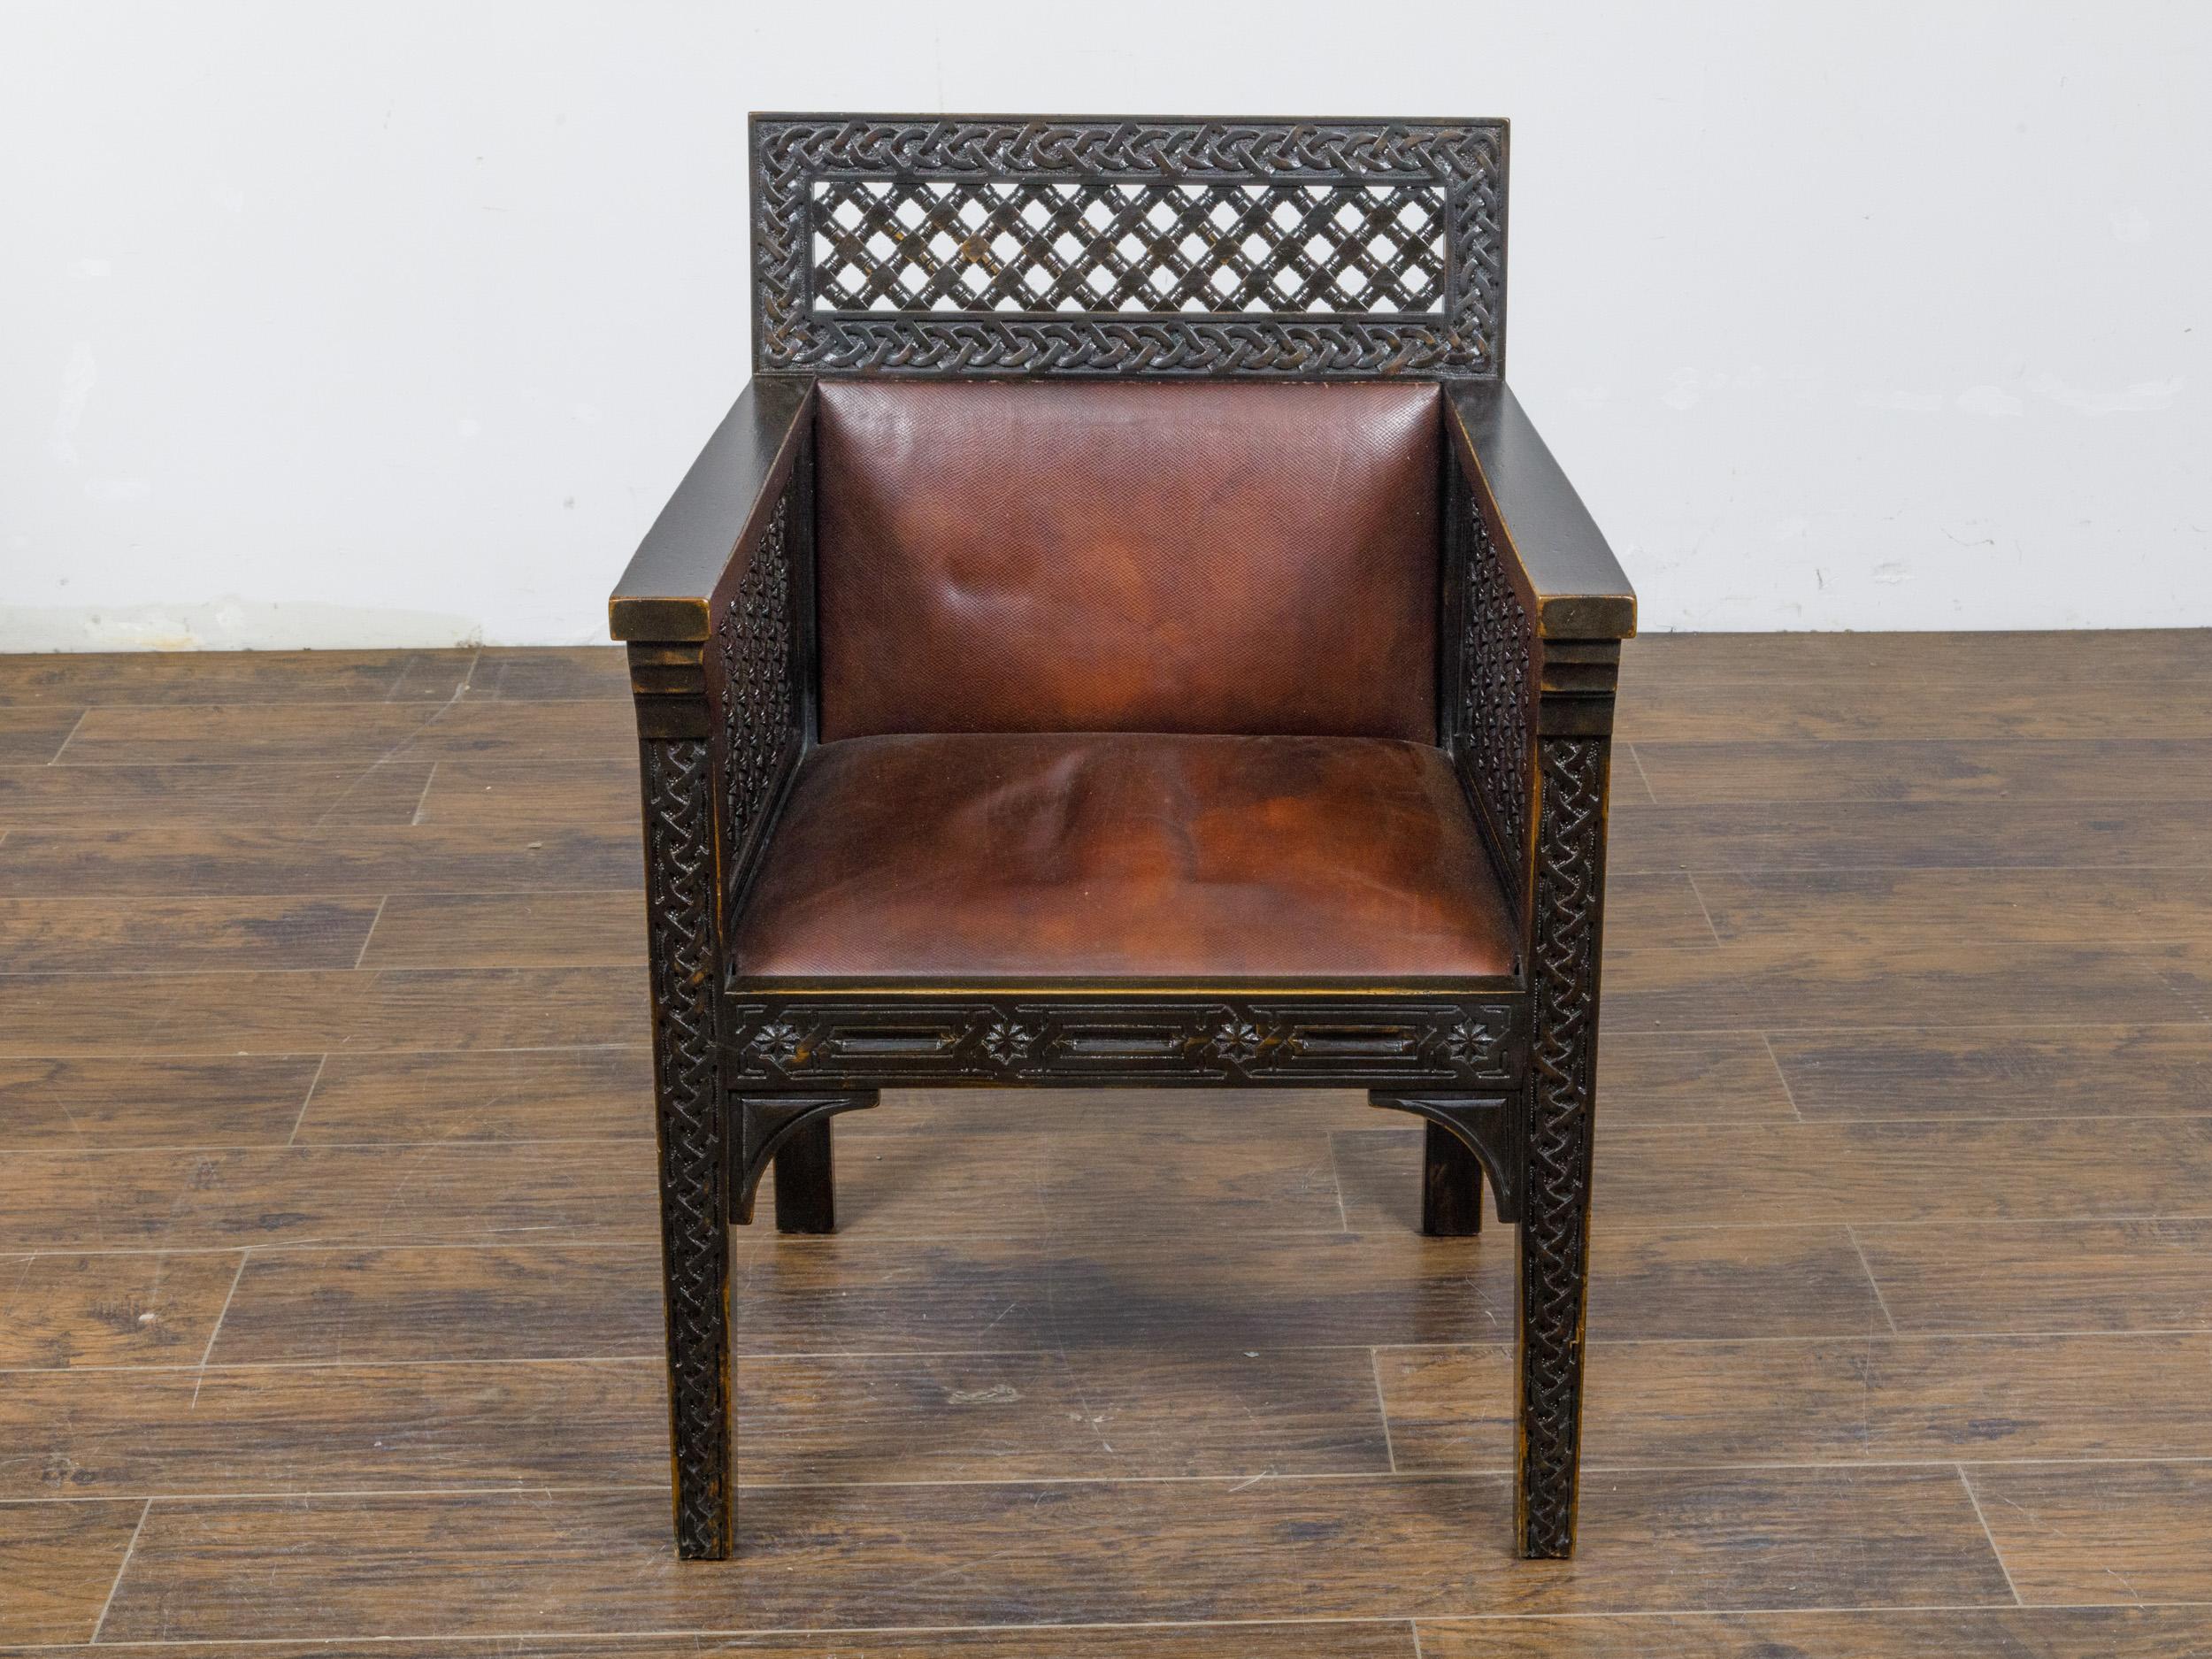 Set of 12 Moroccan Ebonized Carved Wood Armchairs with Leather Seats, circa 1900 For Sale 9